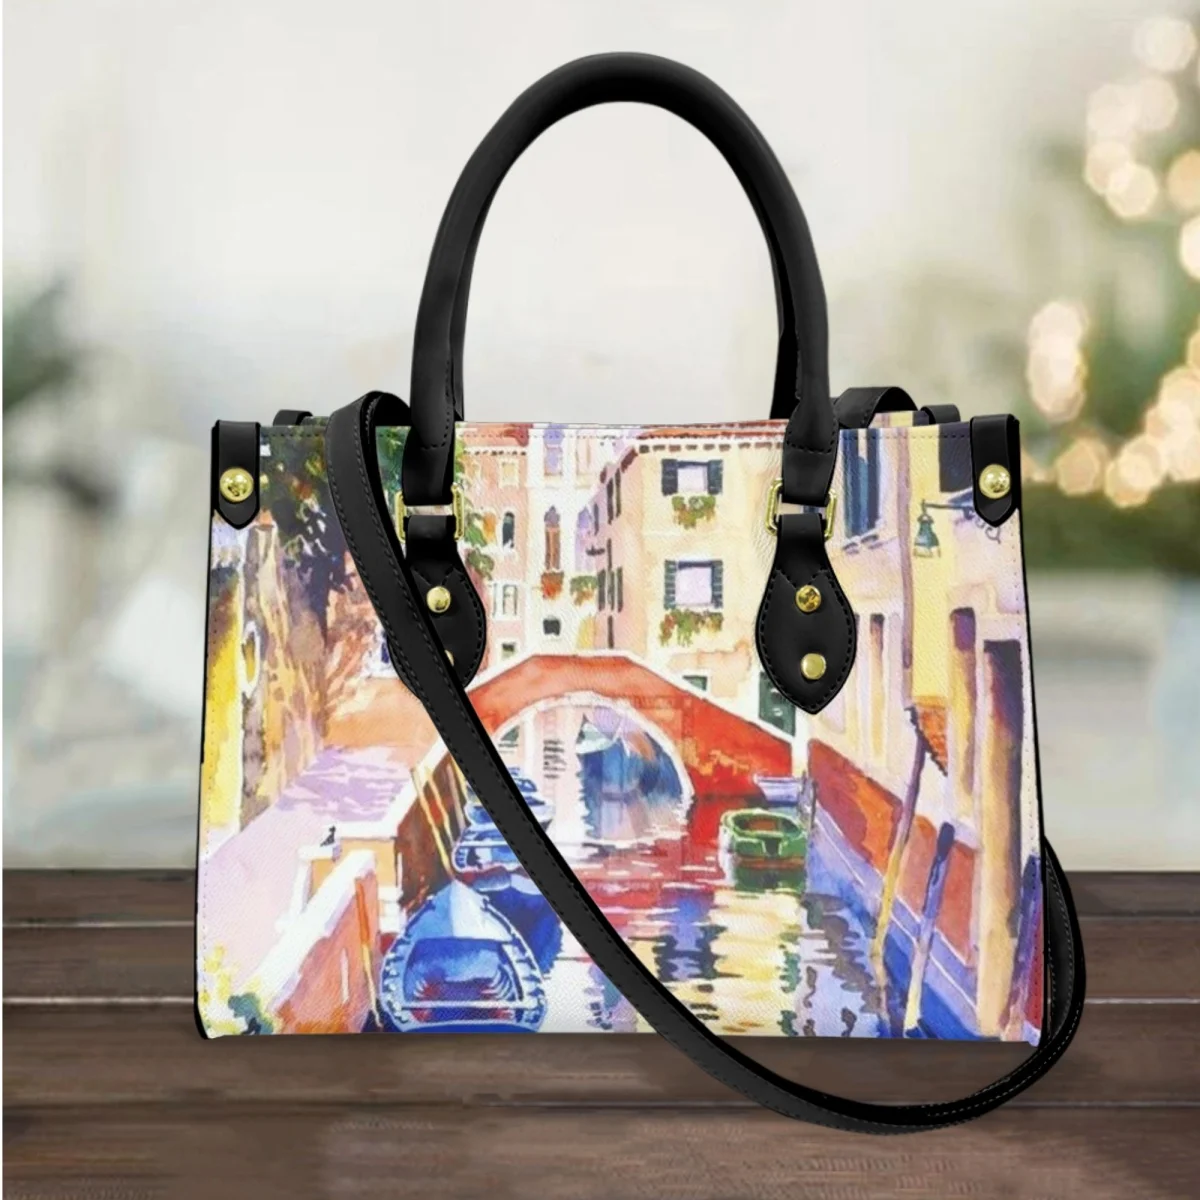 

FORUDESIGNS Ladies Handbags Oil Painting Street Scene Design Casual Shoulder Bag Leather Fashion Tote Bags For Women Gift